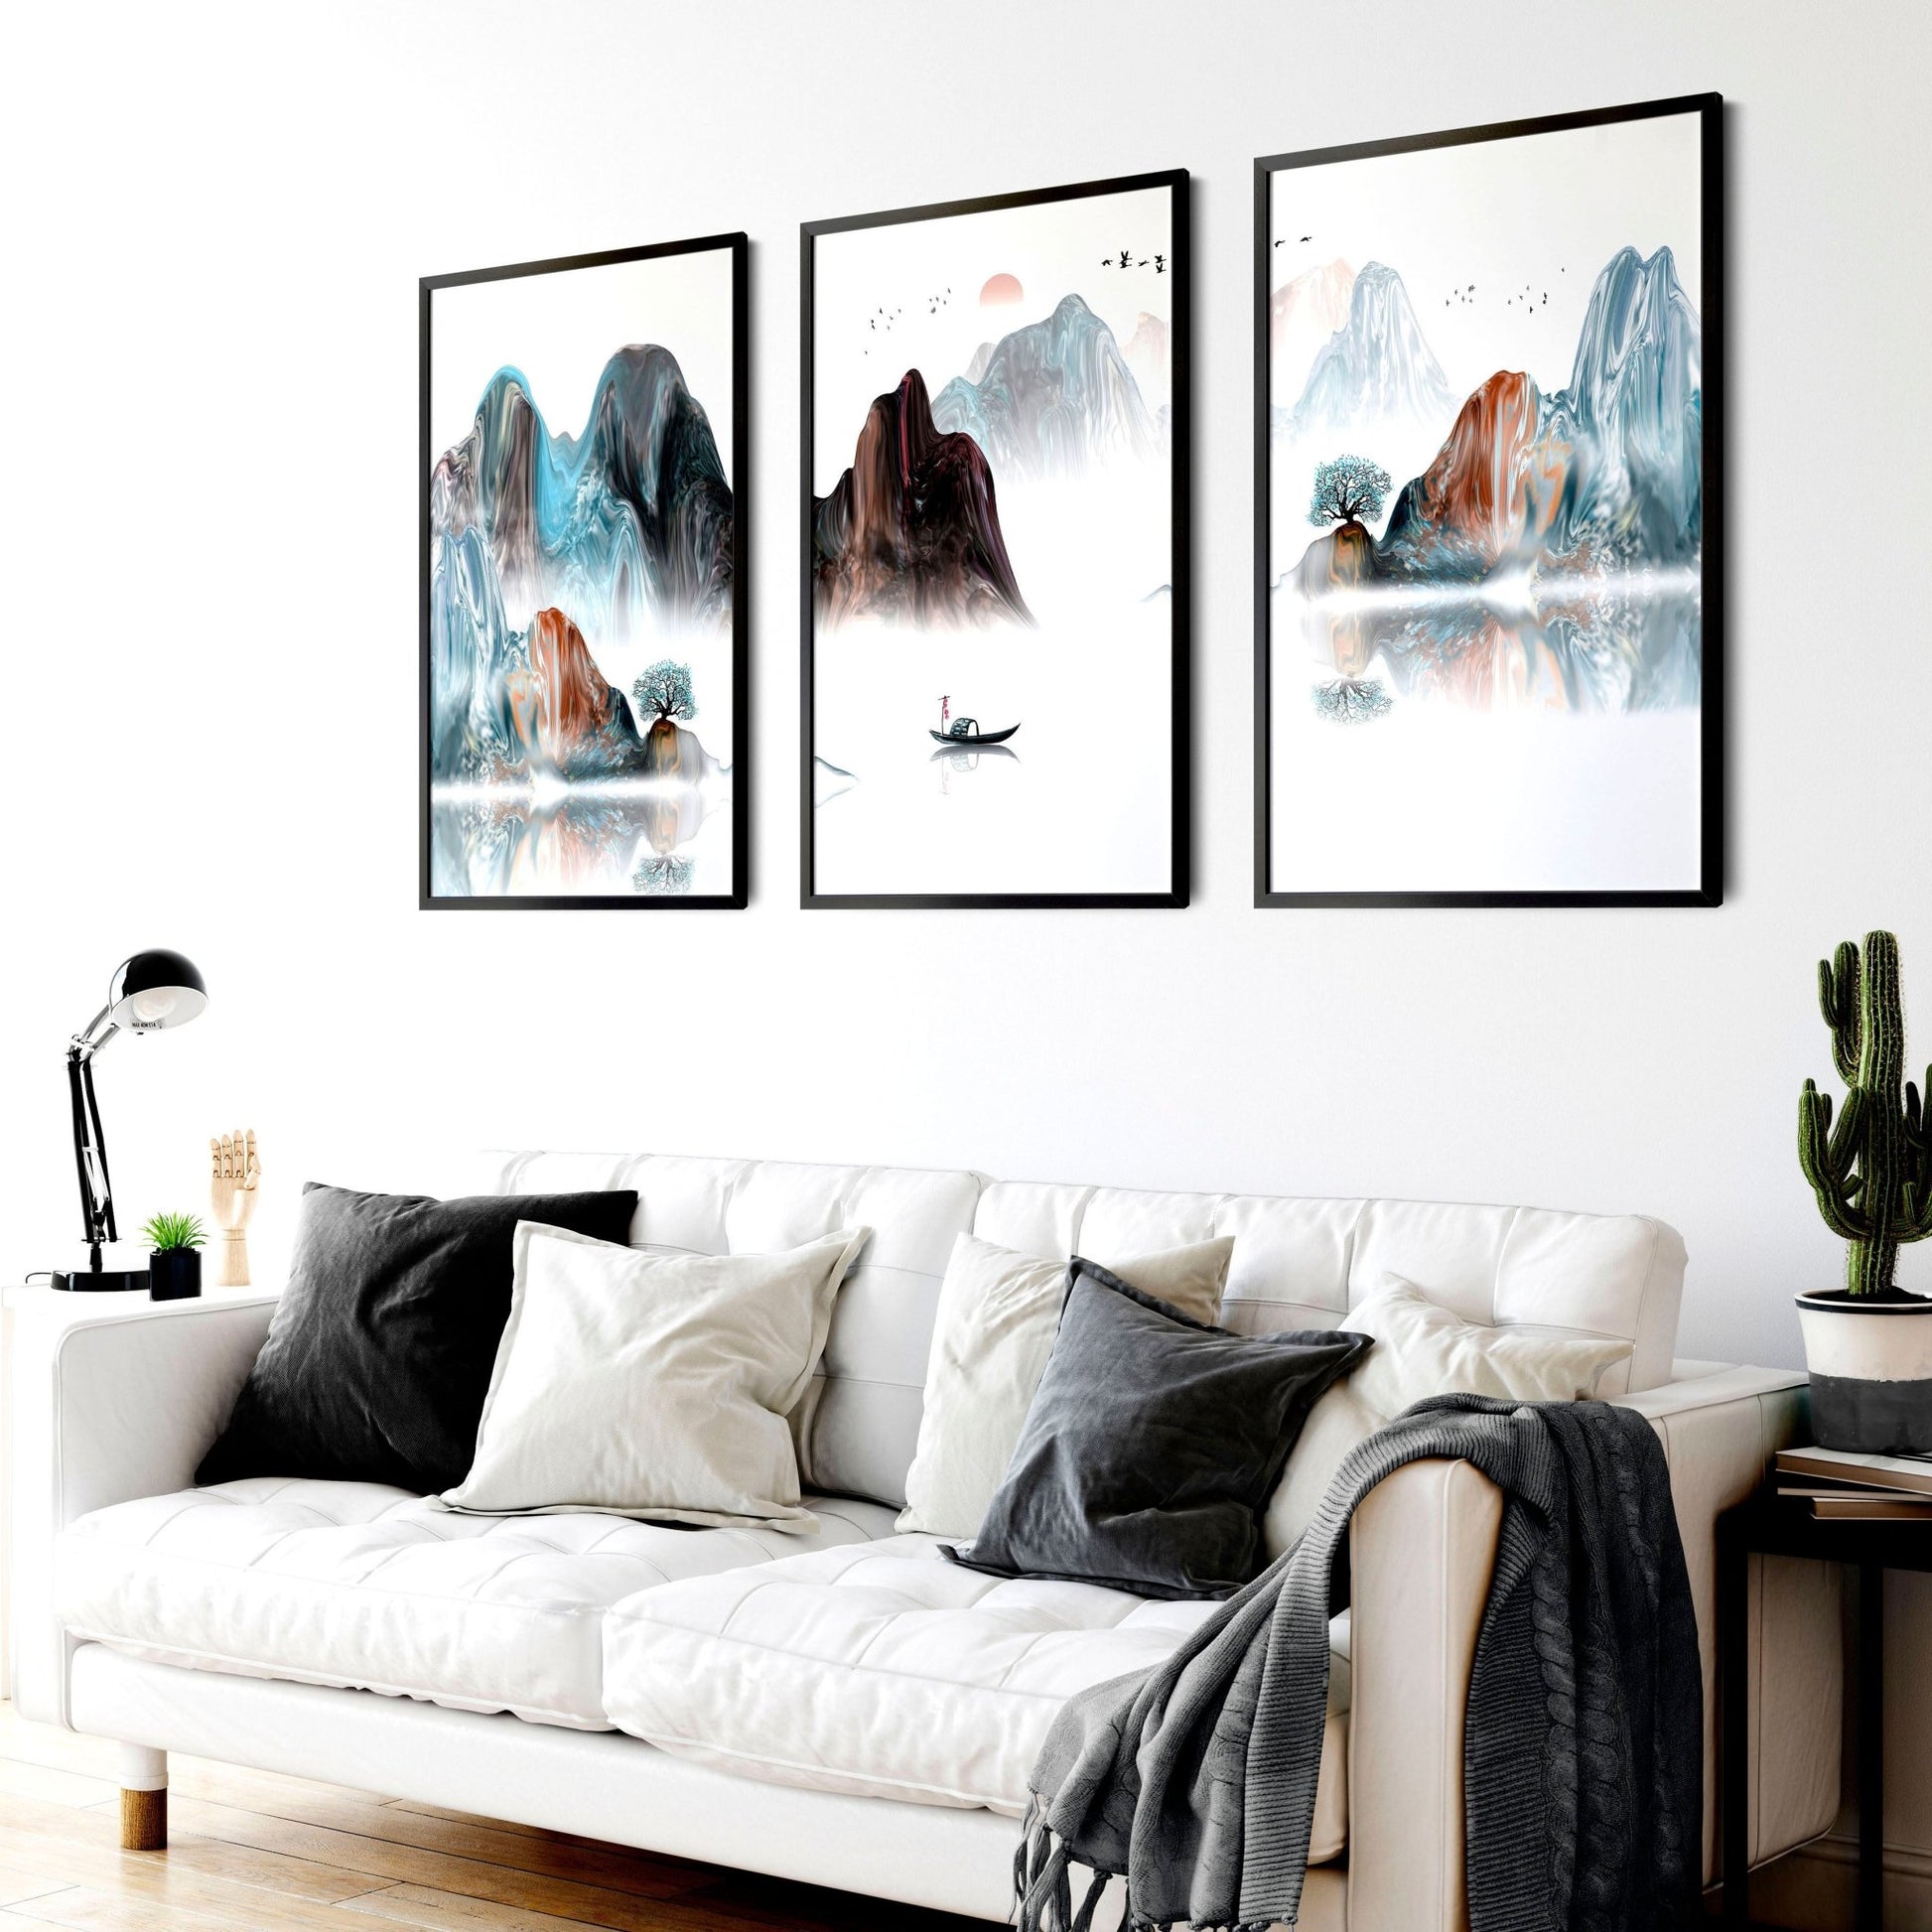 Japandi interior design | set of 3 wall art prints for Living room - About Wall Art